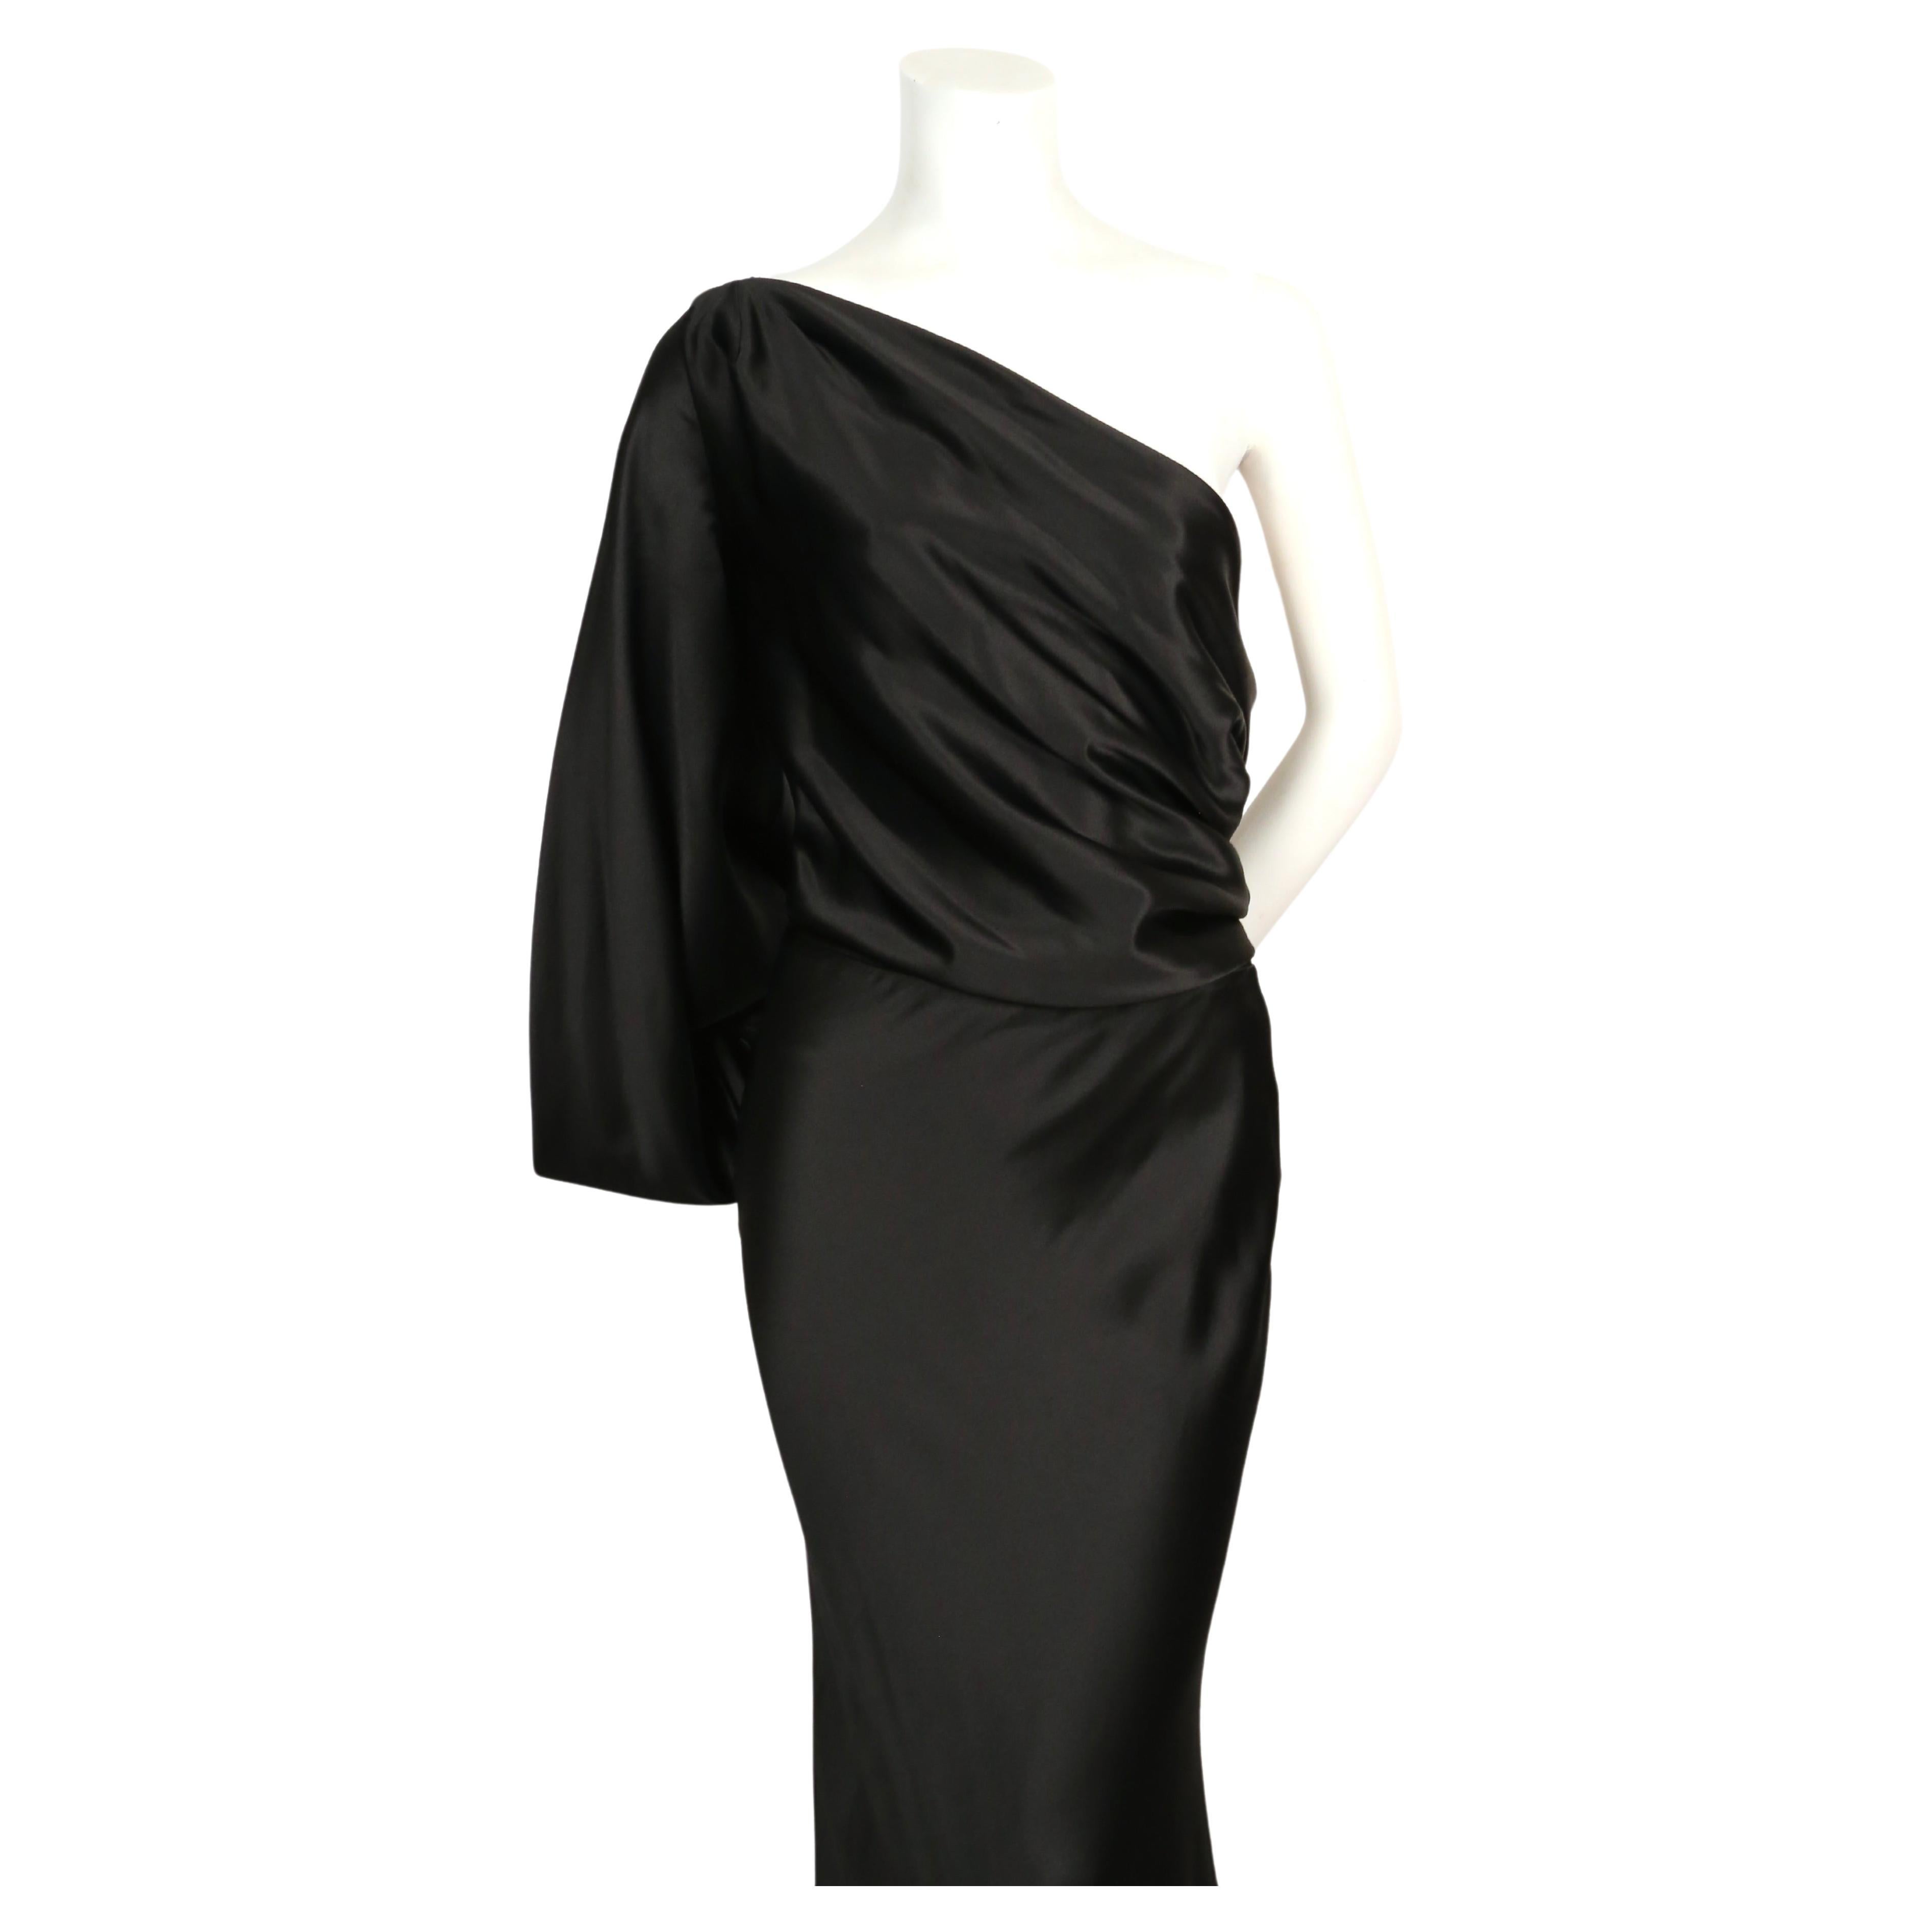 2008 ALEXANDER MCQUEEN black draped silk bias cut dress with asymmetrical bodice In Good Condition For Sale In San Fransisco, CA